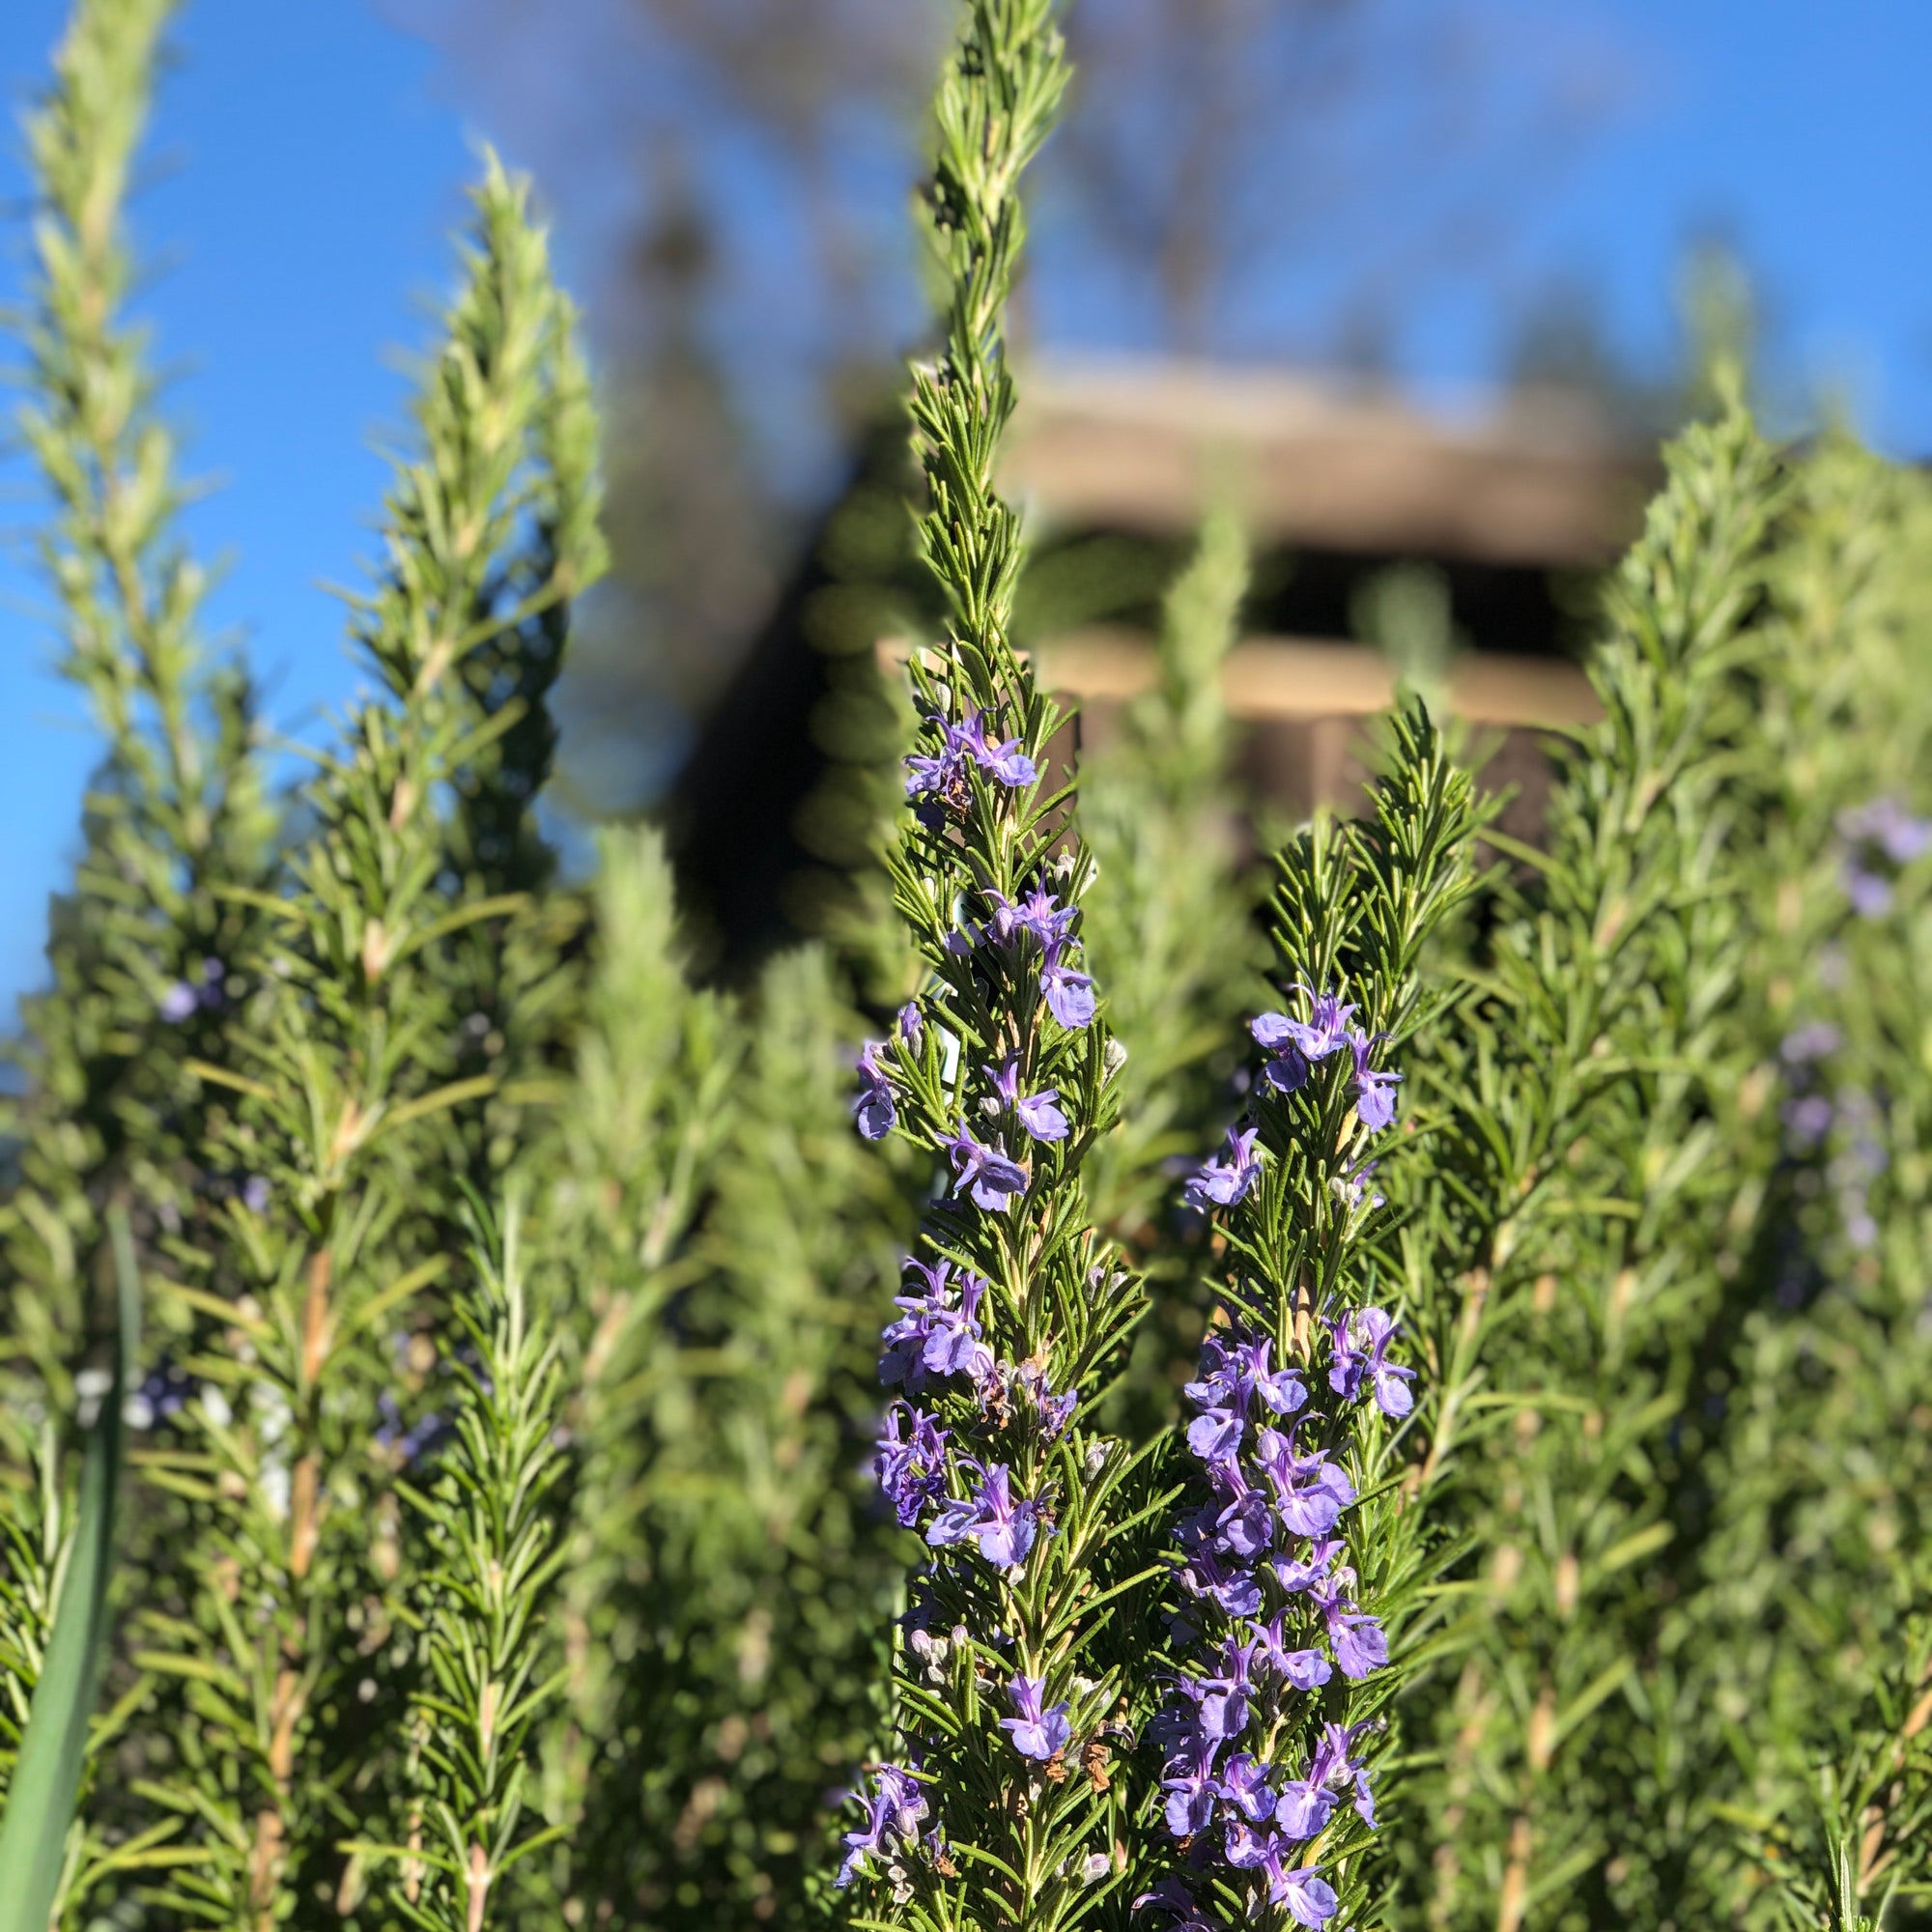 What are the benefits of Rosemary?